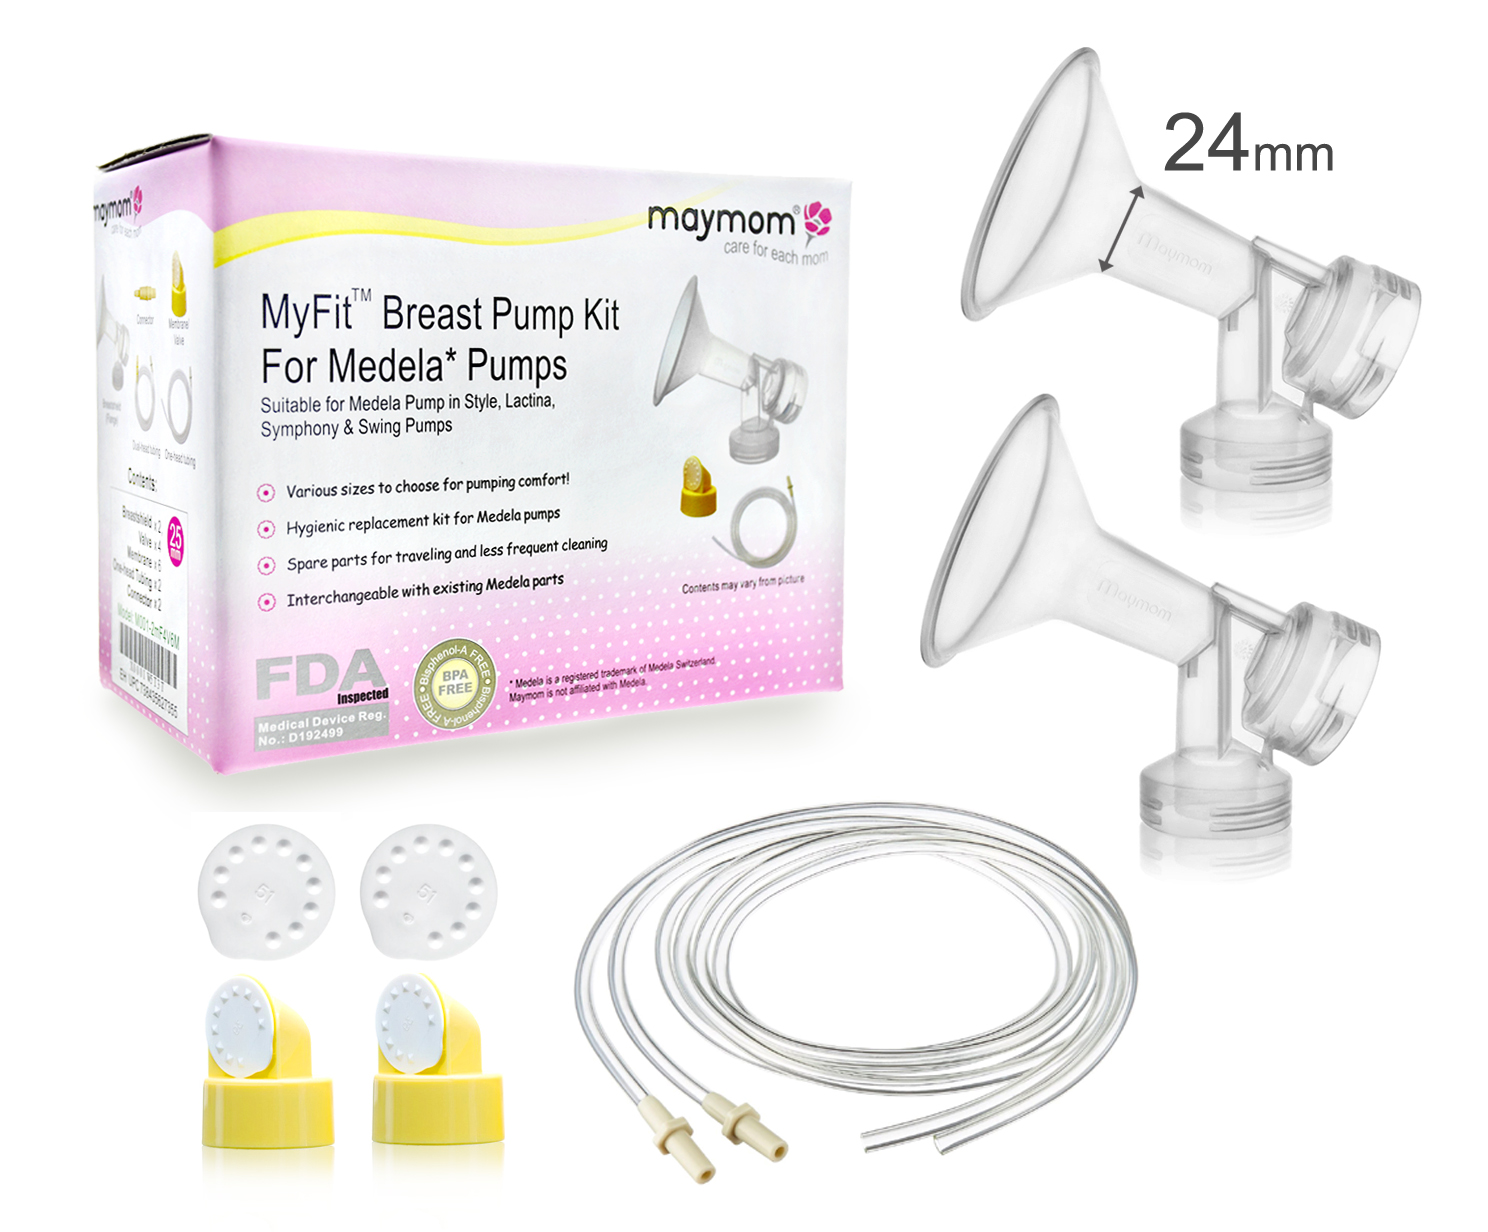 Breast Pump Kit for Medela Double Electric Pump in Style Pumps; 2 One-Piece Breastshields (M, 24 mm), 2 Valves, 4 Membranes